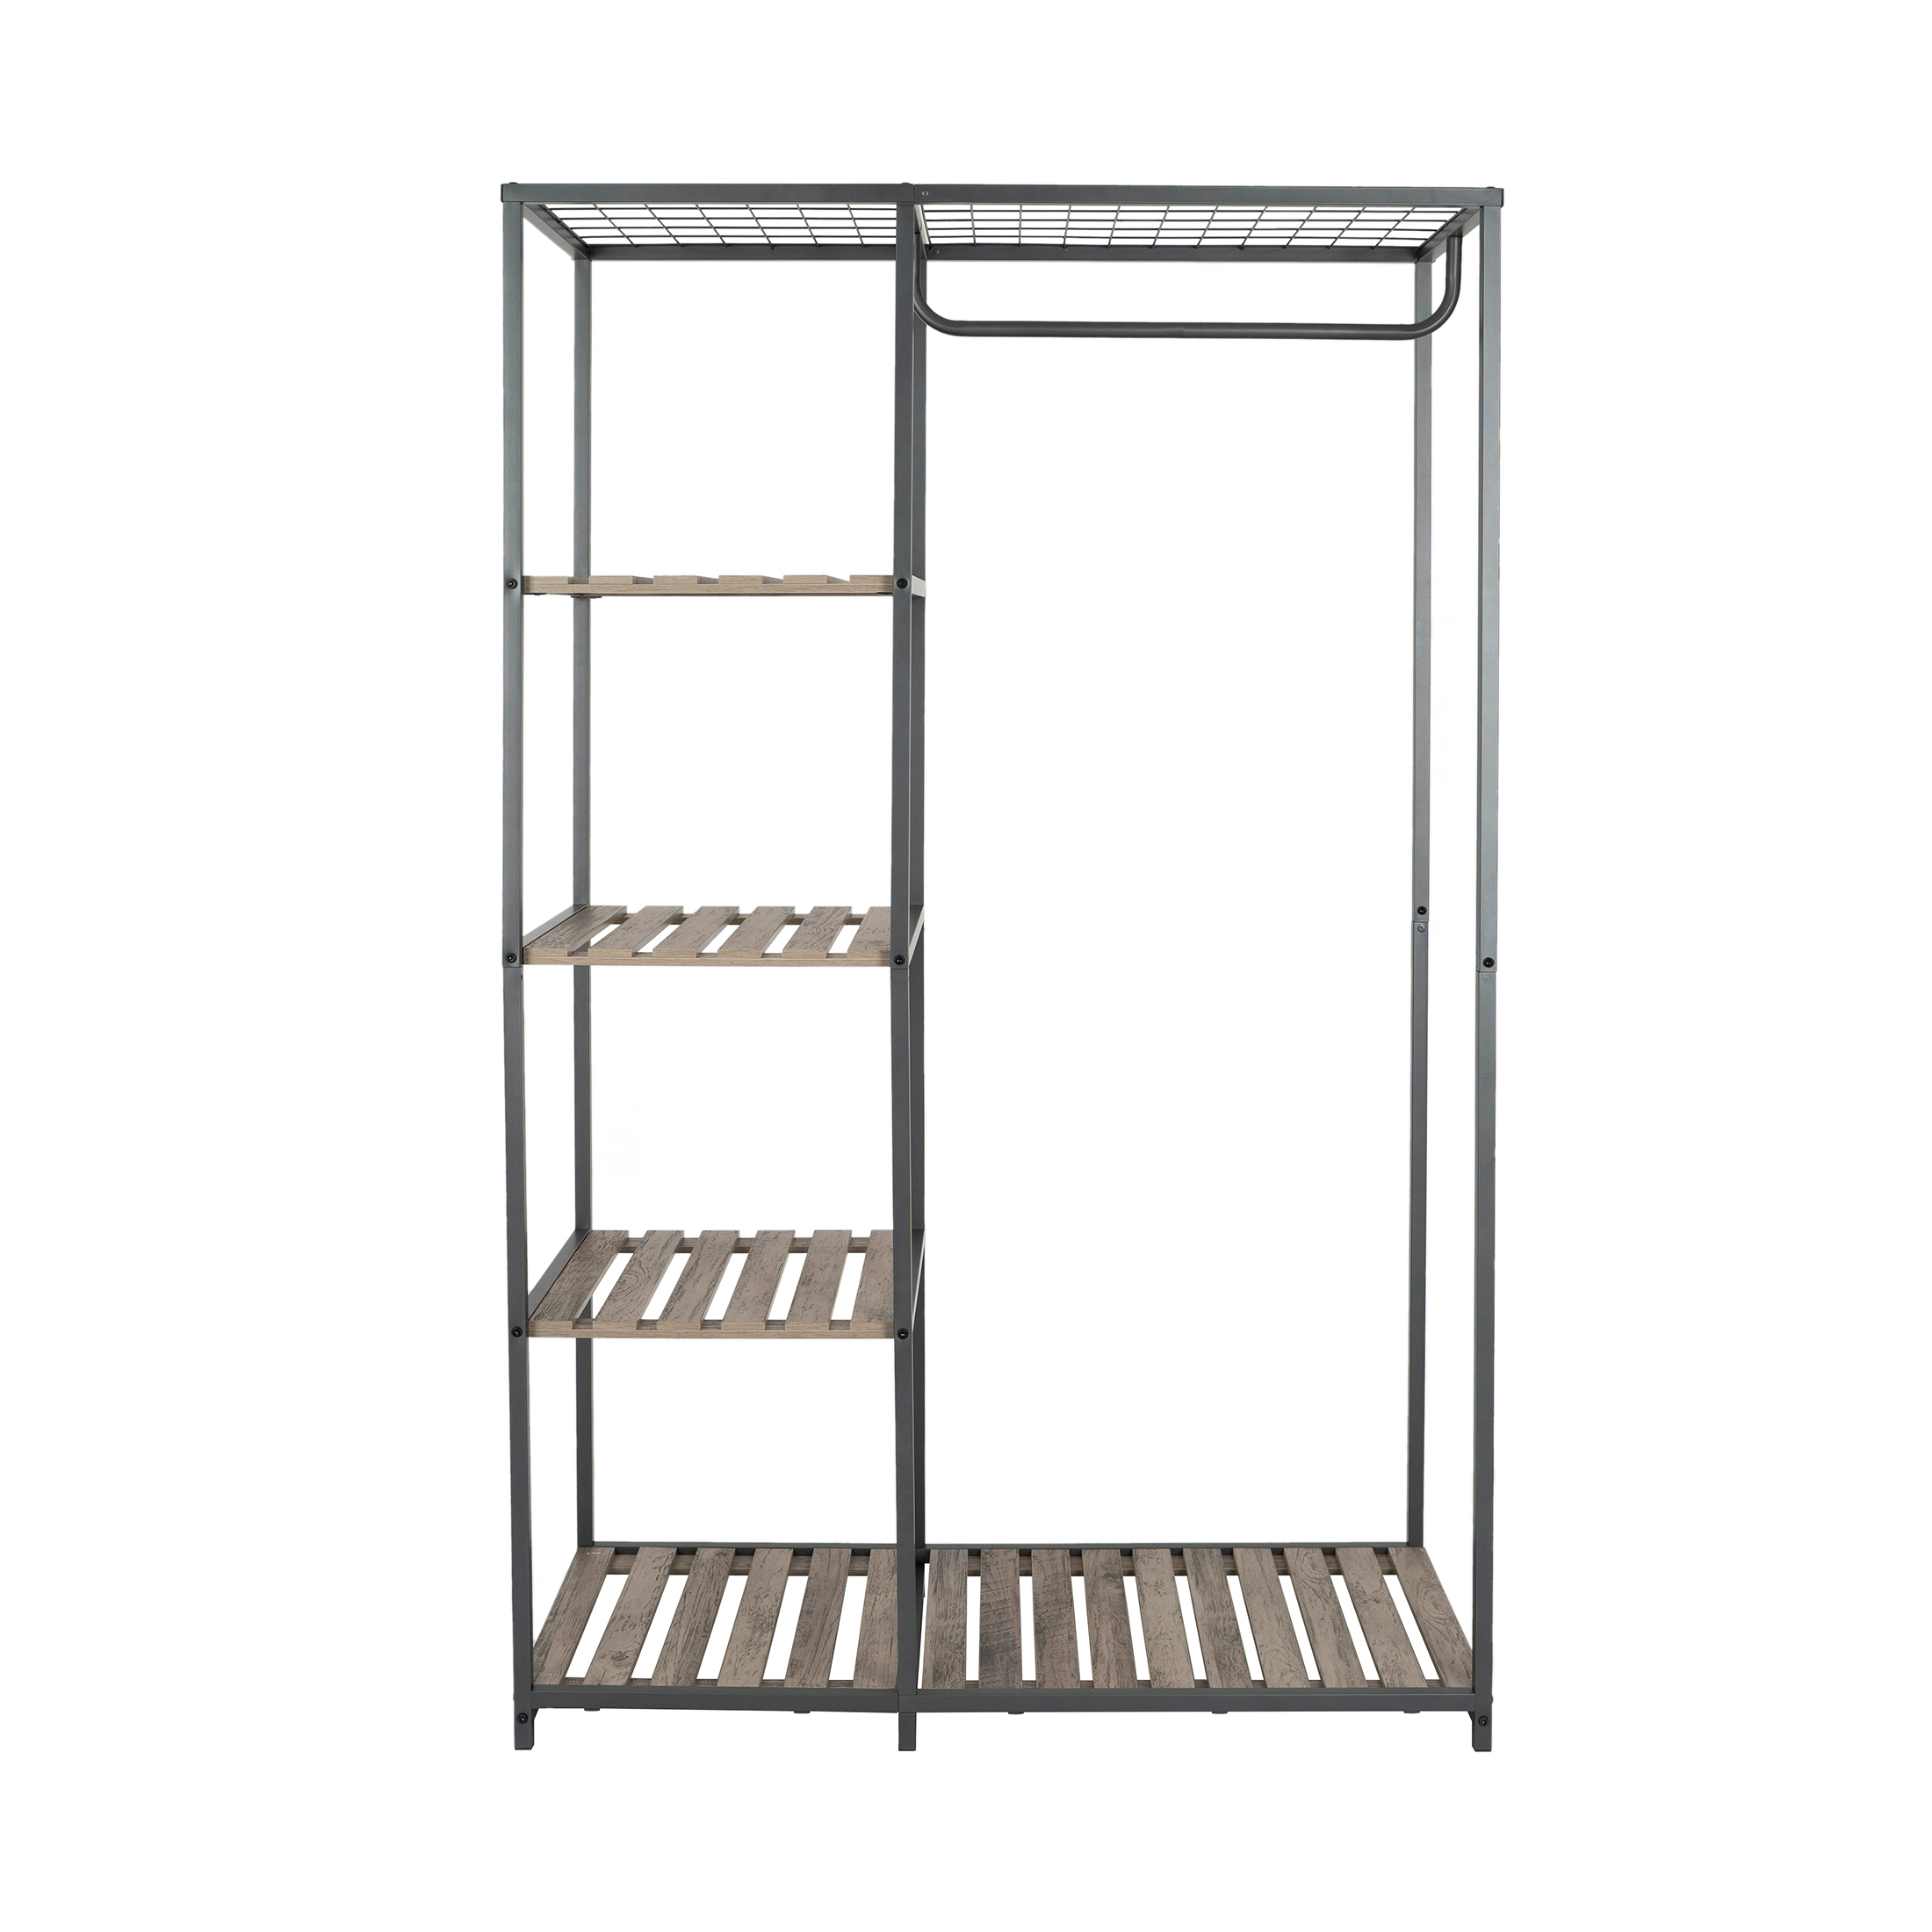 Better Homes & Gardens Farmhouse Gray Wood and Metal Garment Rack - image 4 of 7